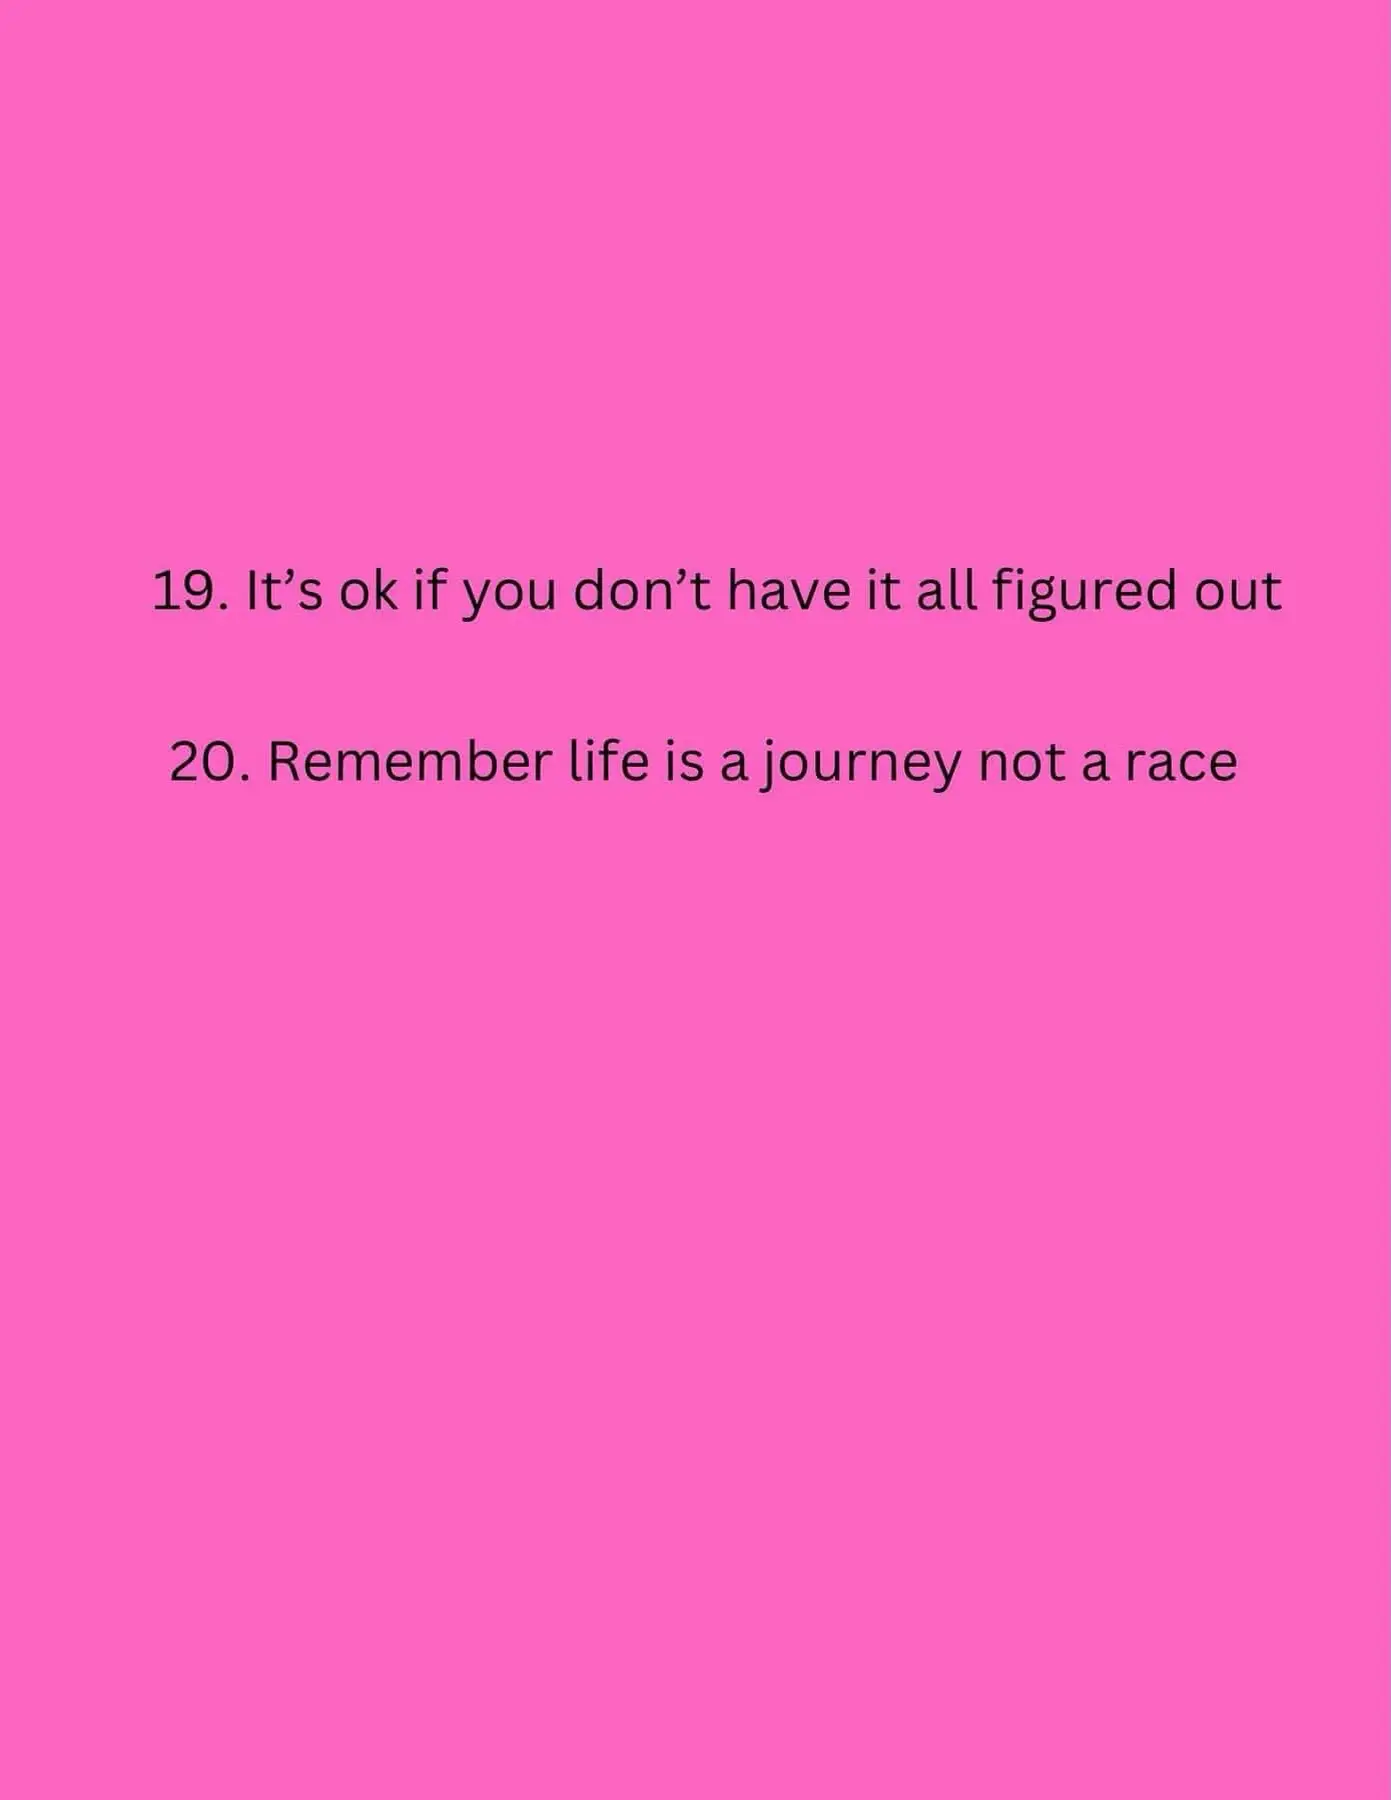  A pink background with text that says "Remember life is a journey not a race".